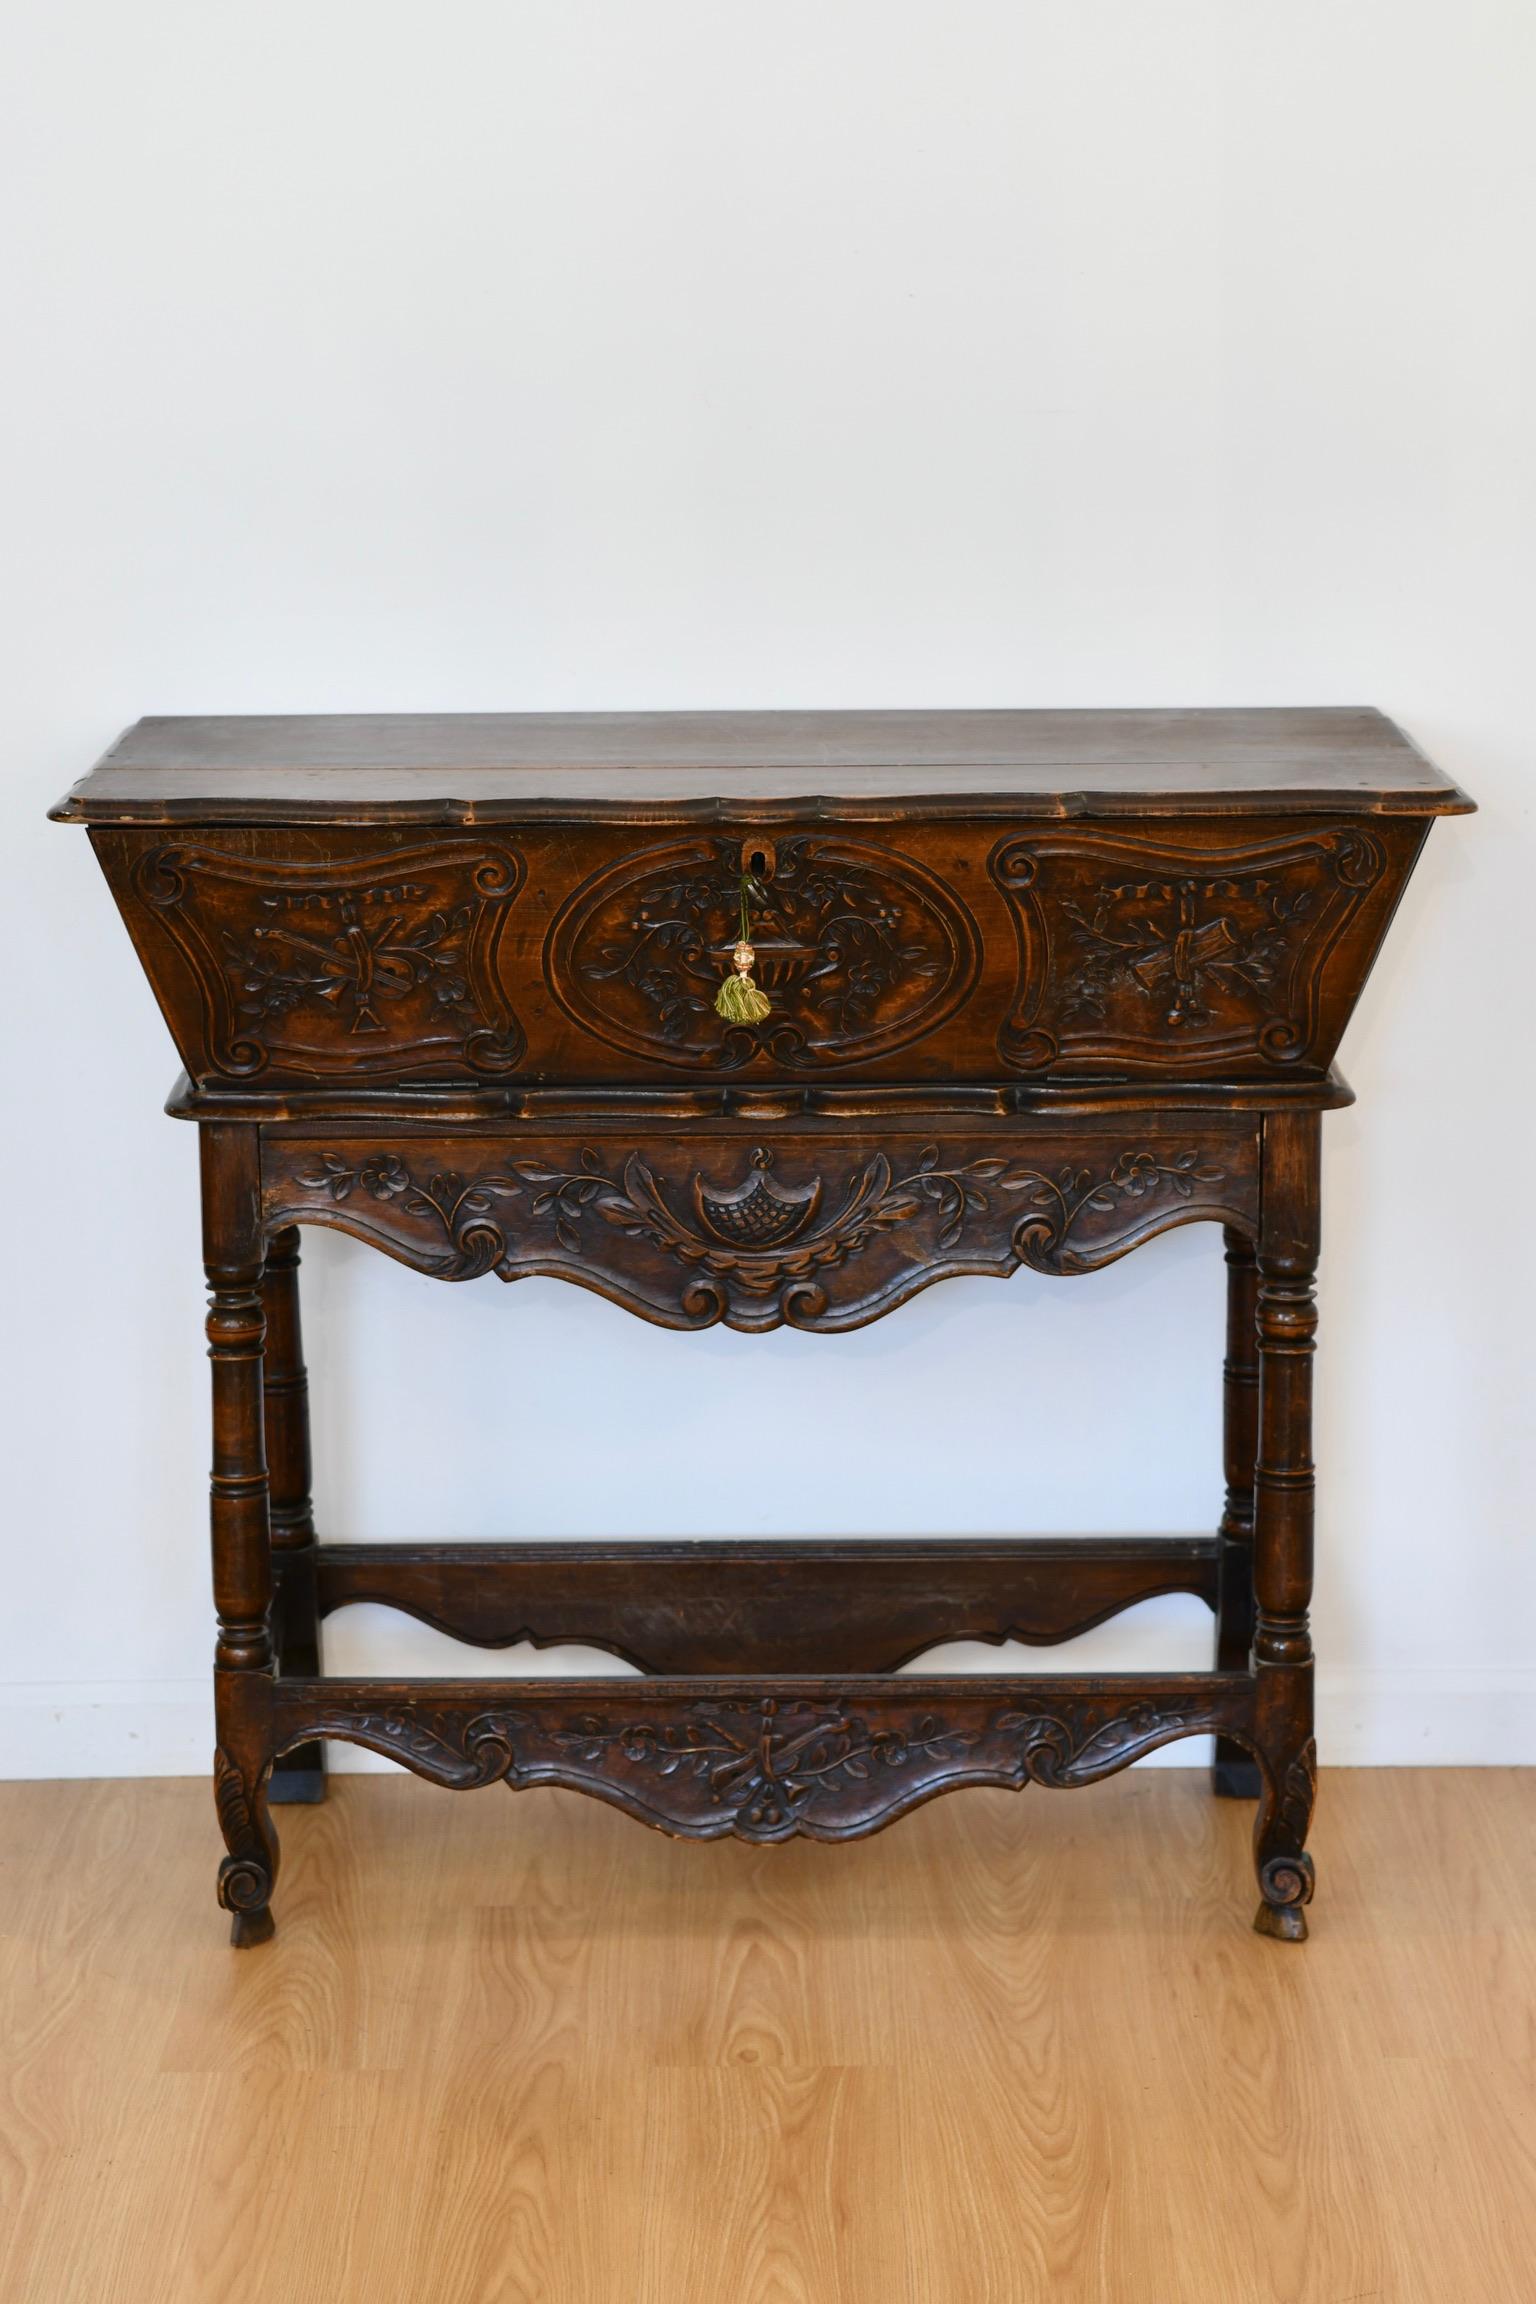 French provincial-style walnut ‘pétrin’ or dough table or with drop down storage compartment and drawer below. Dimensions: 36.5